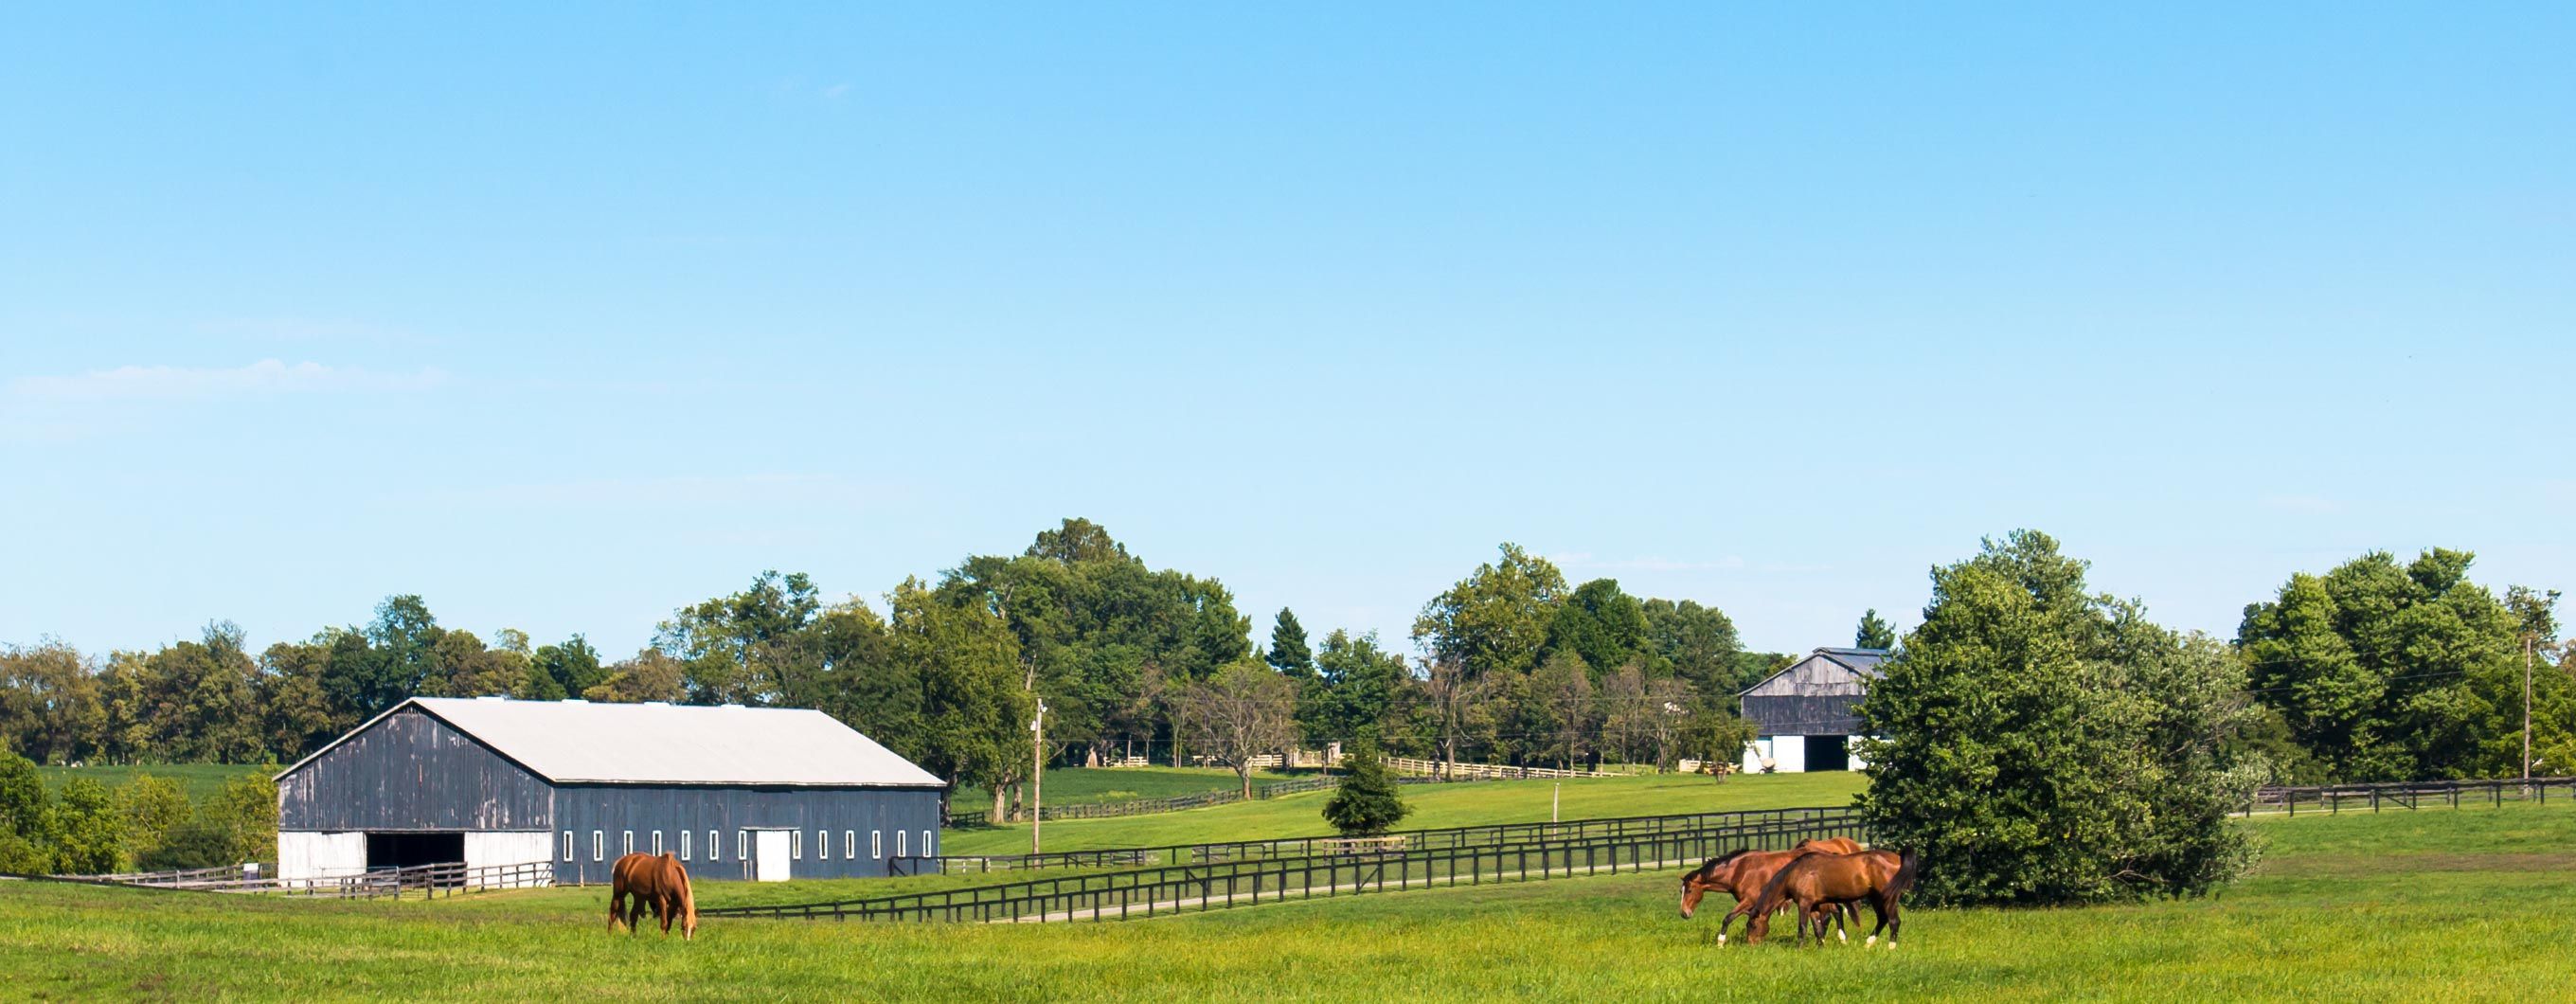 Image of a large farm house with horses grazing in a field below a clear blue sky